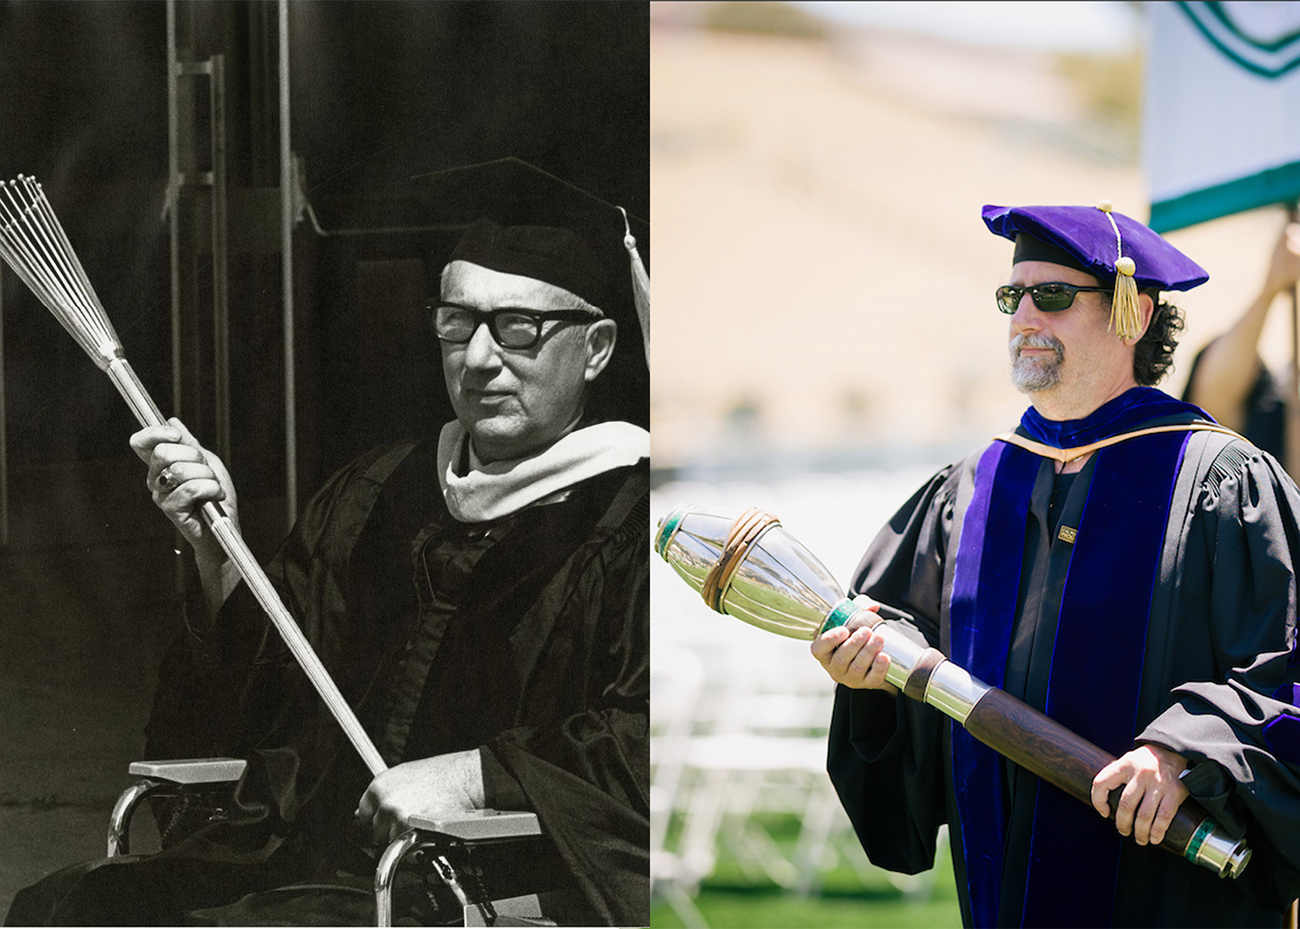 Left: In a black and white photo, a professor in academic regalia holds a long, spiny ceremonial mace. Right: A professor in academic regalia walks across a field holding a bulbous ceremonial mace.